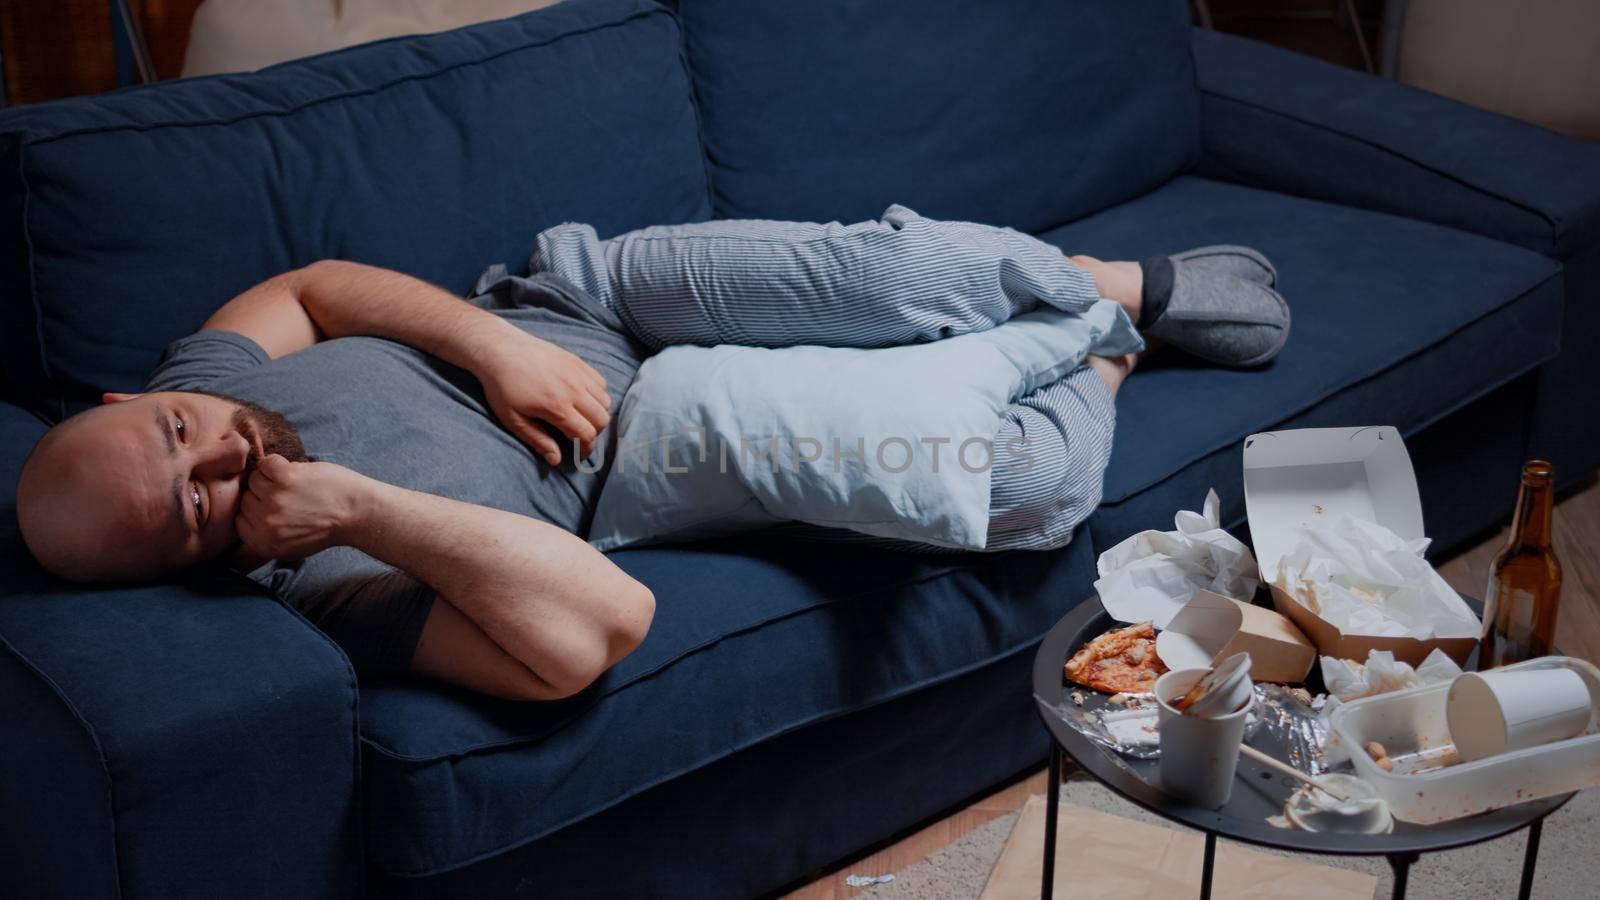 Adult man unable to enjoy life because of major depression, bipolar disorder, mental problem, anxiety, crying and feeling unhappy, vulnerable, traumatized. Depressed, sad, desperate male lying on sofa